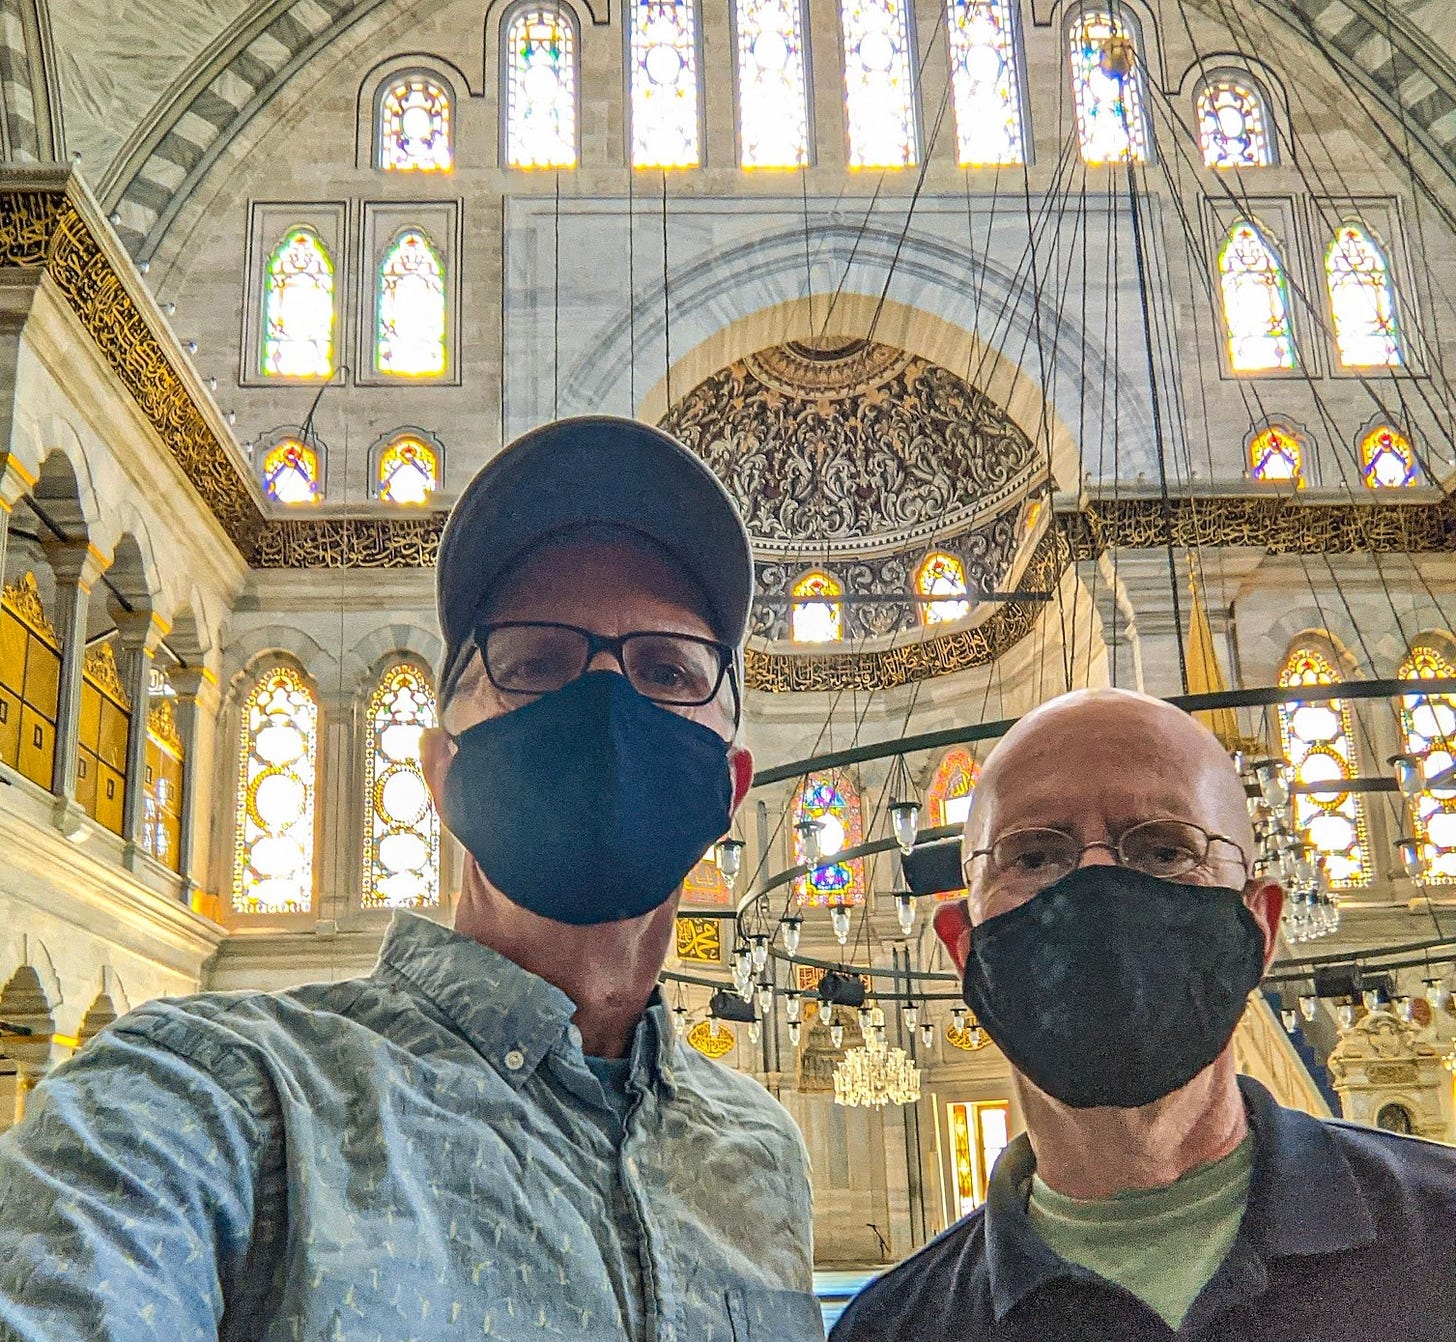 Brent and Michael wearing masks and visiting a mosque in Istanbul. The mosque is made of white marble with stained glass windows and golden calligraphy against a black background.